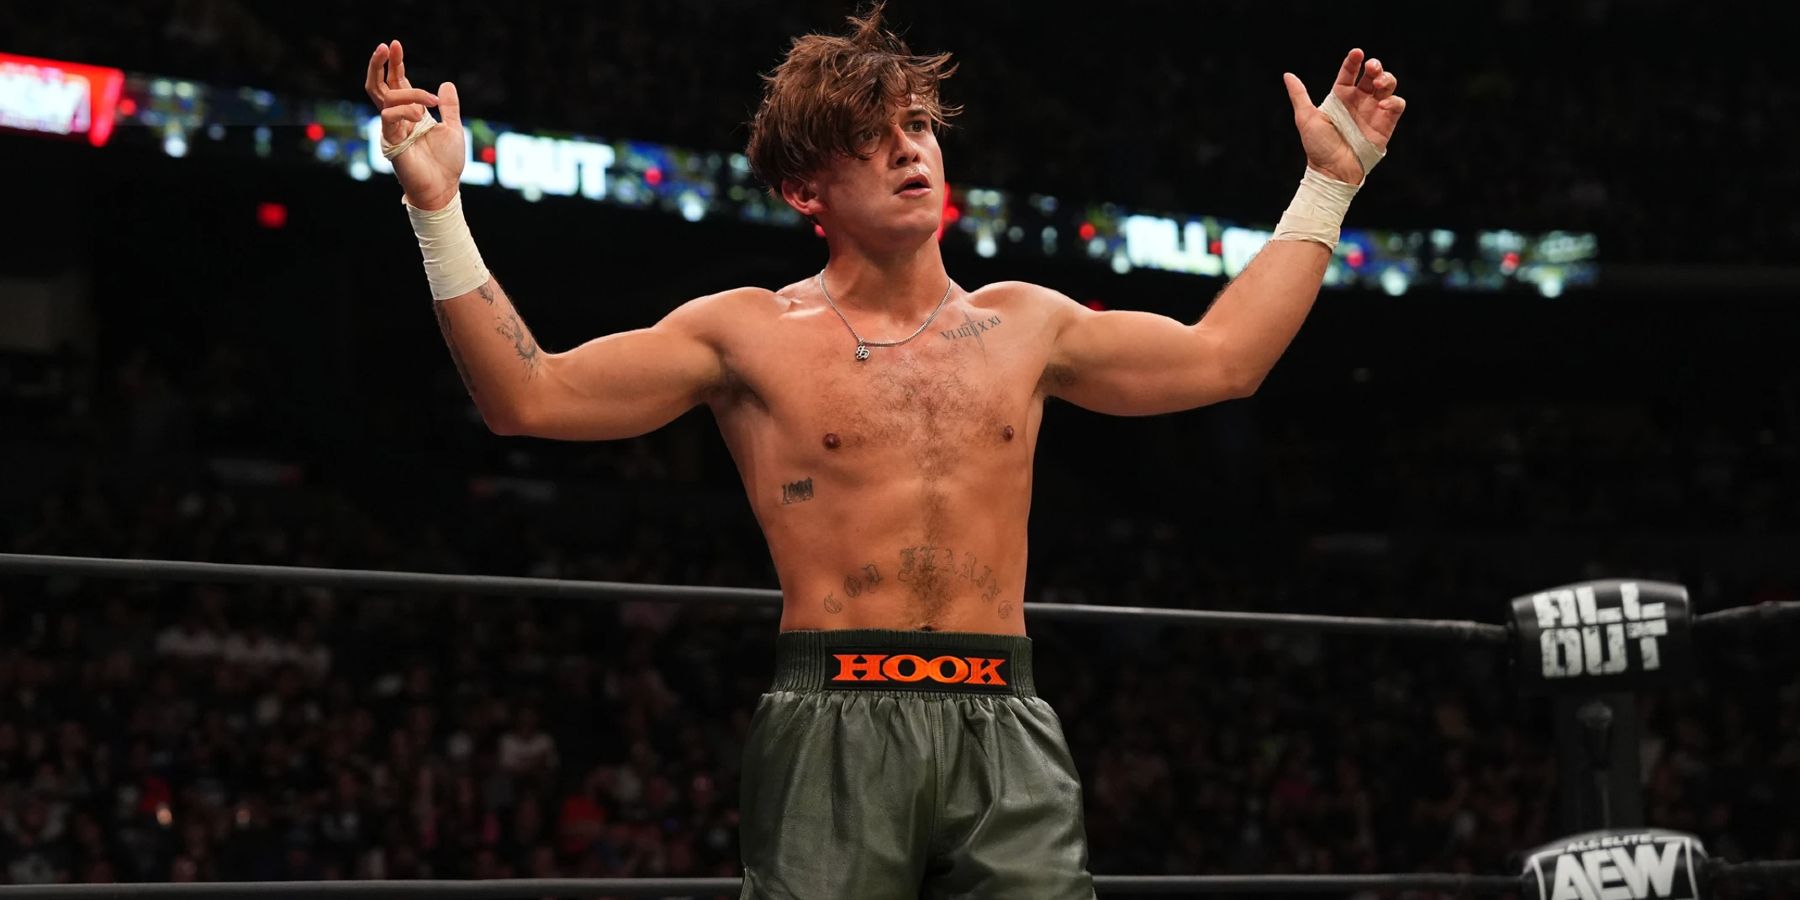 HOOK & Jungle Boy Are Odd-Couple Team AEW Fans Didn't Know They Needed